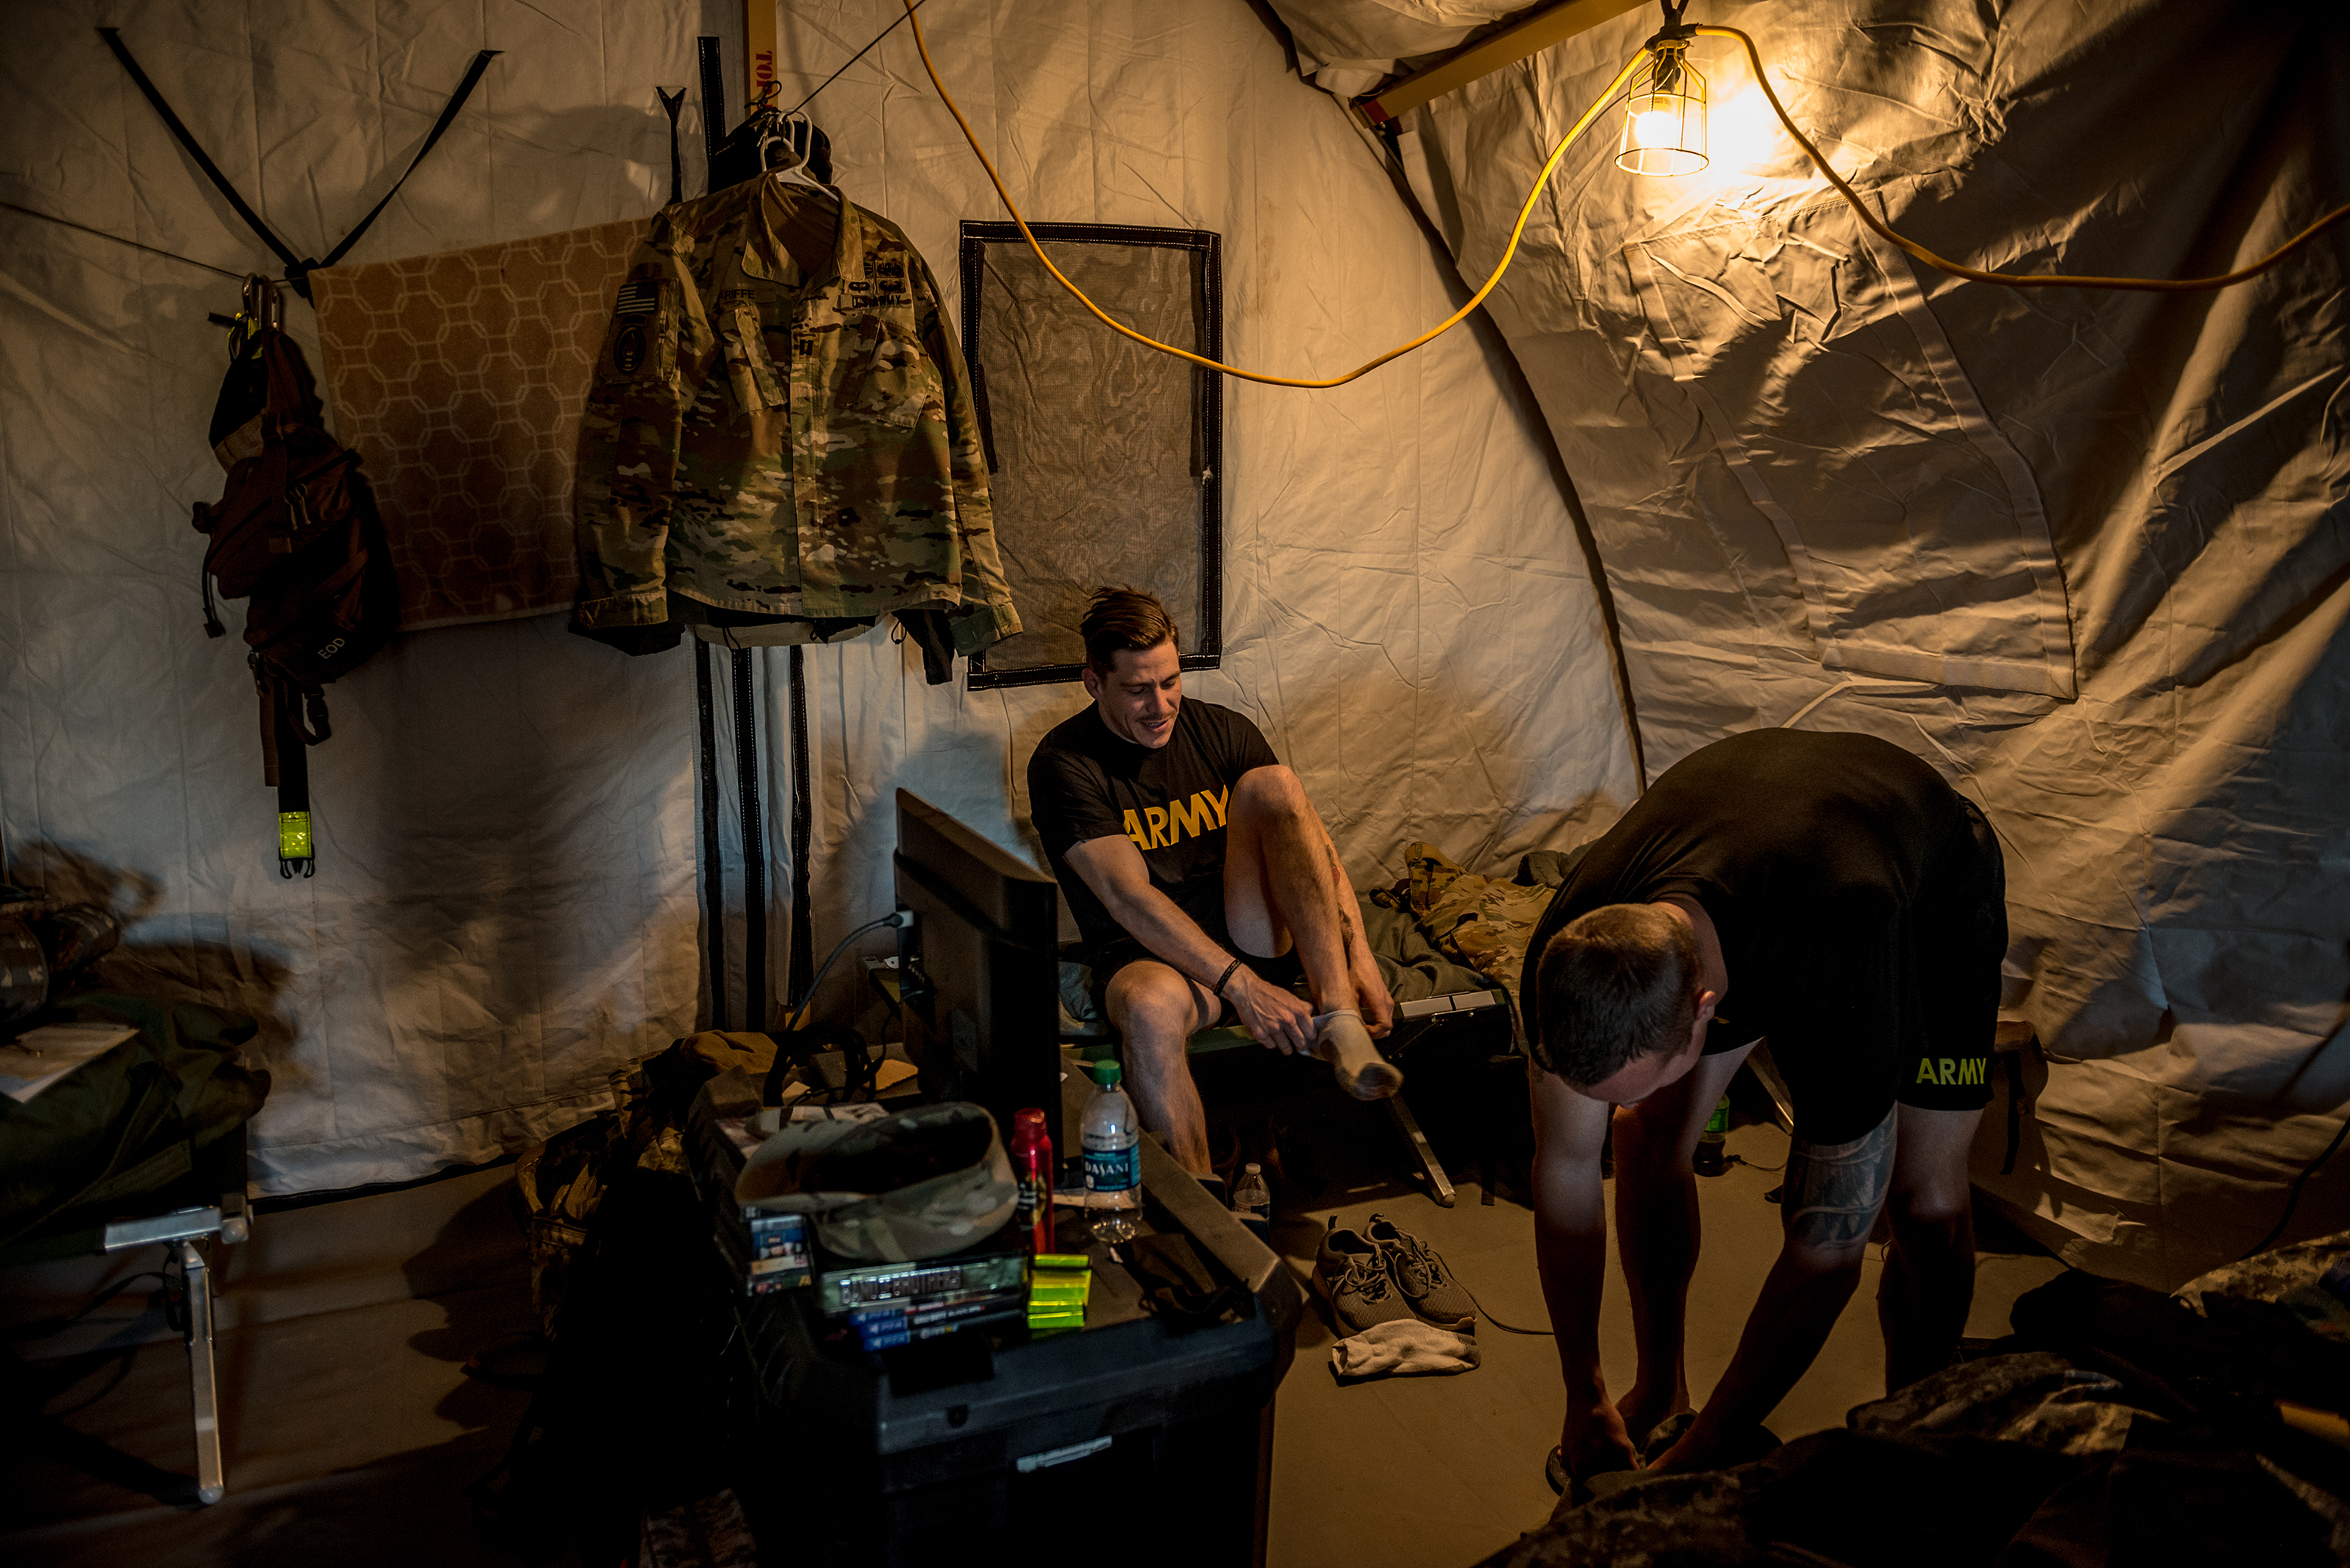 Cpt. Jacob Riffe, 29, from Augusta, Ga., puts his shoes on after waking up just after dawn inside his unit's tent. (Meridith Kohut for TIME)